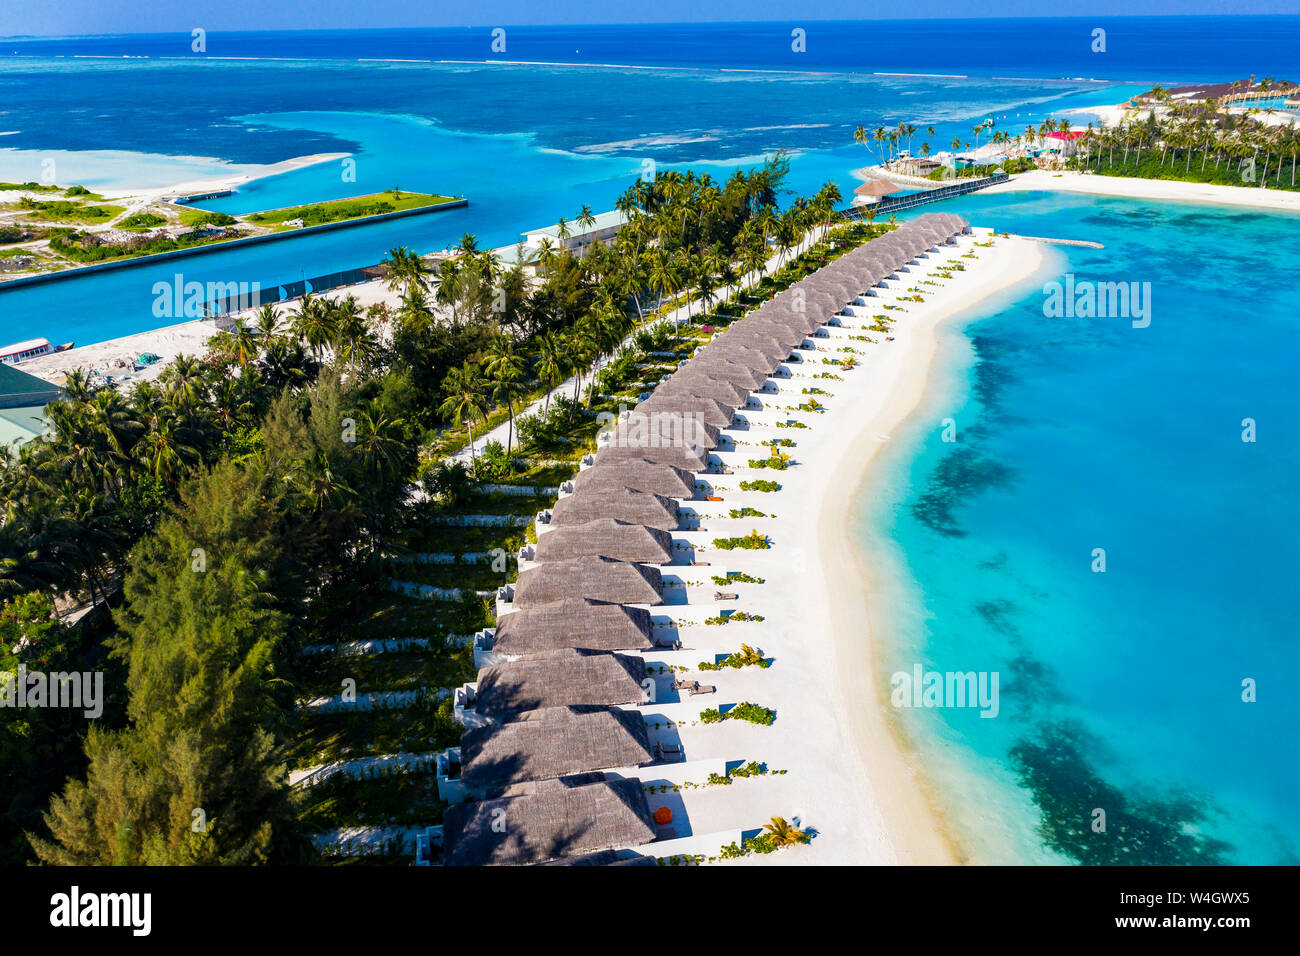 Aerial view of water bungalows, Olhuveli, South Male Atoll, Maledives Stock Photo